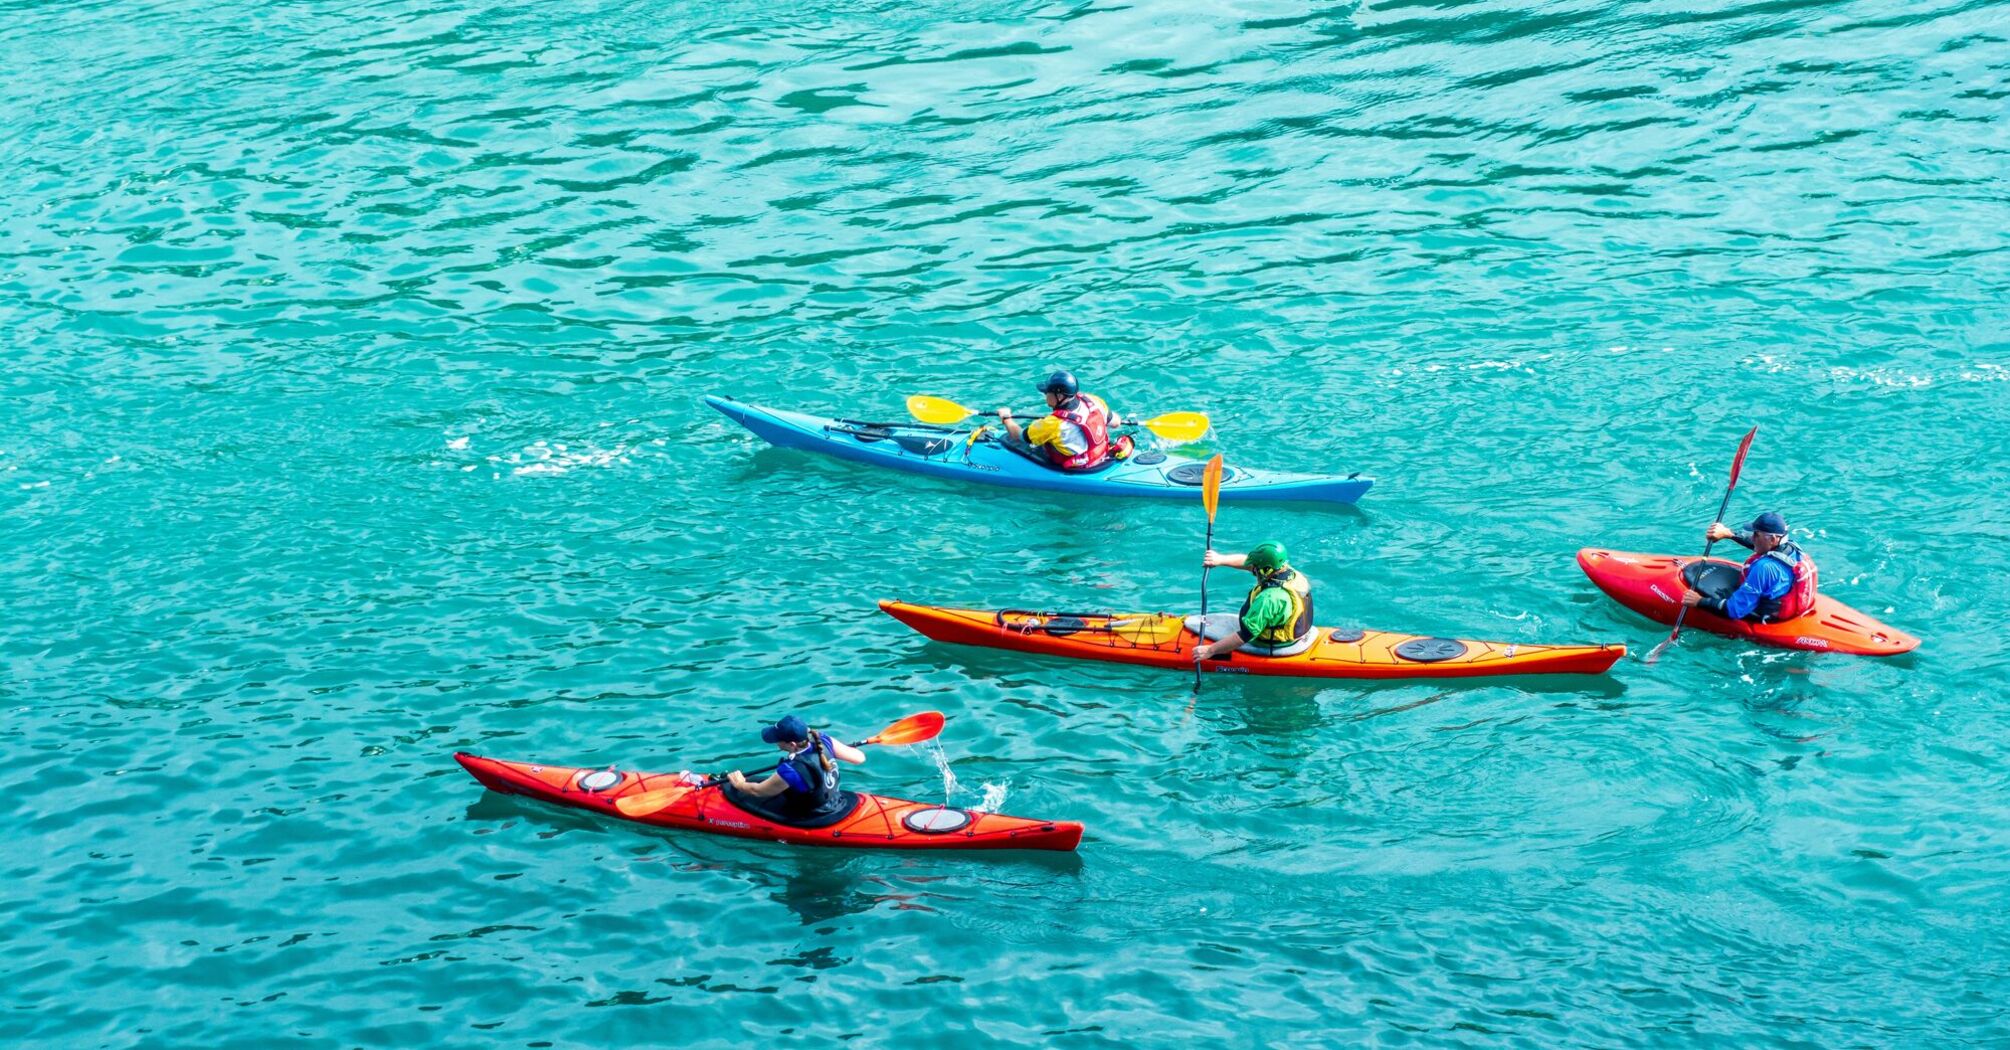 several persons riding kayaks on body of water during daytime